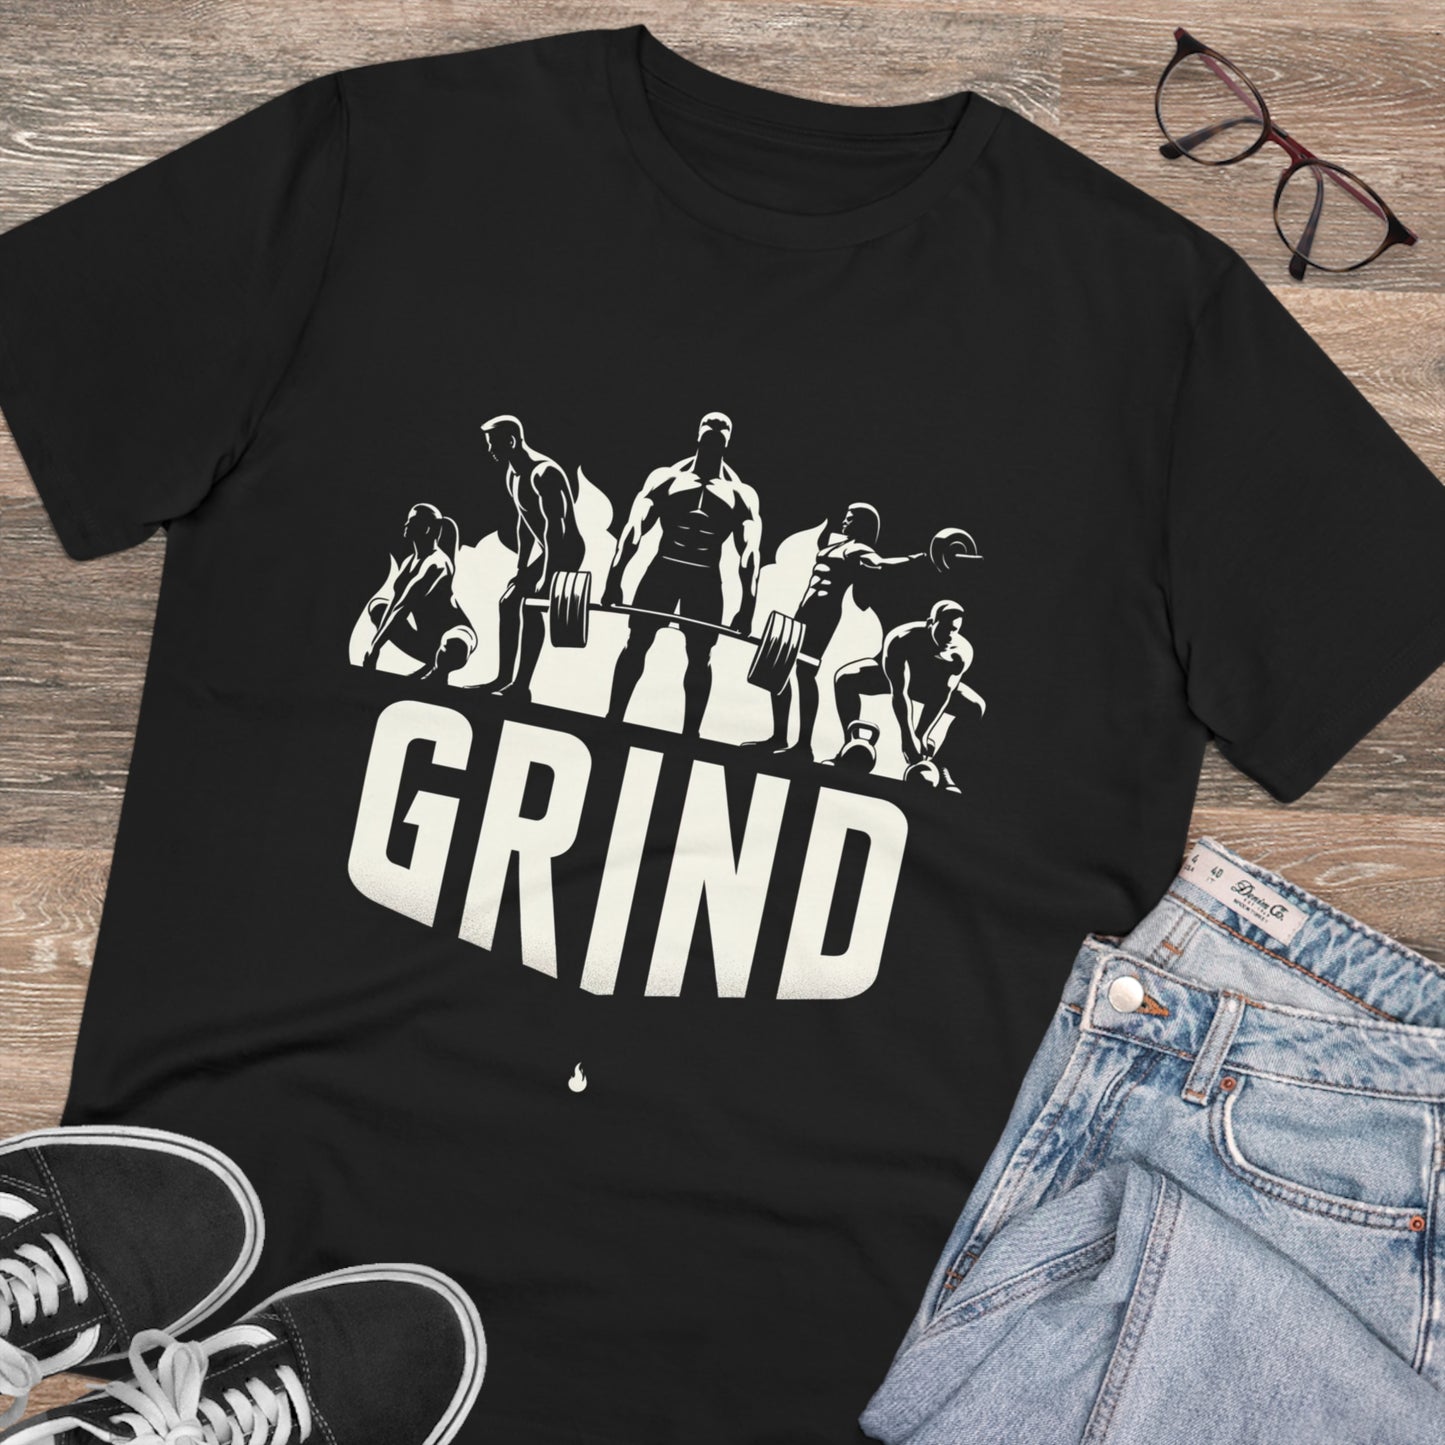 Daily Grind Champion Tee "GRIND" T-shirt - Unisex